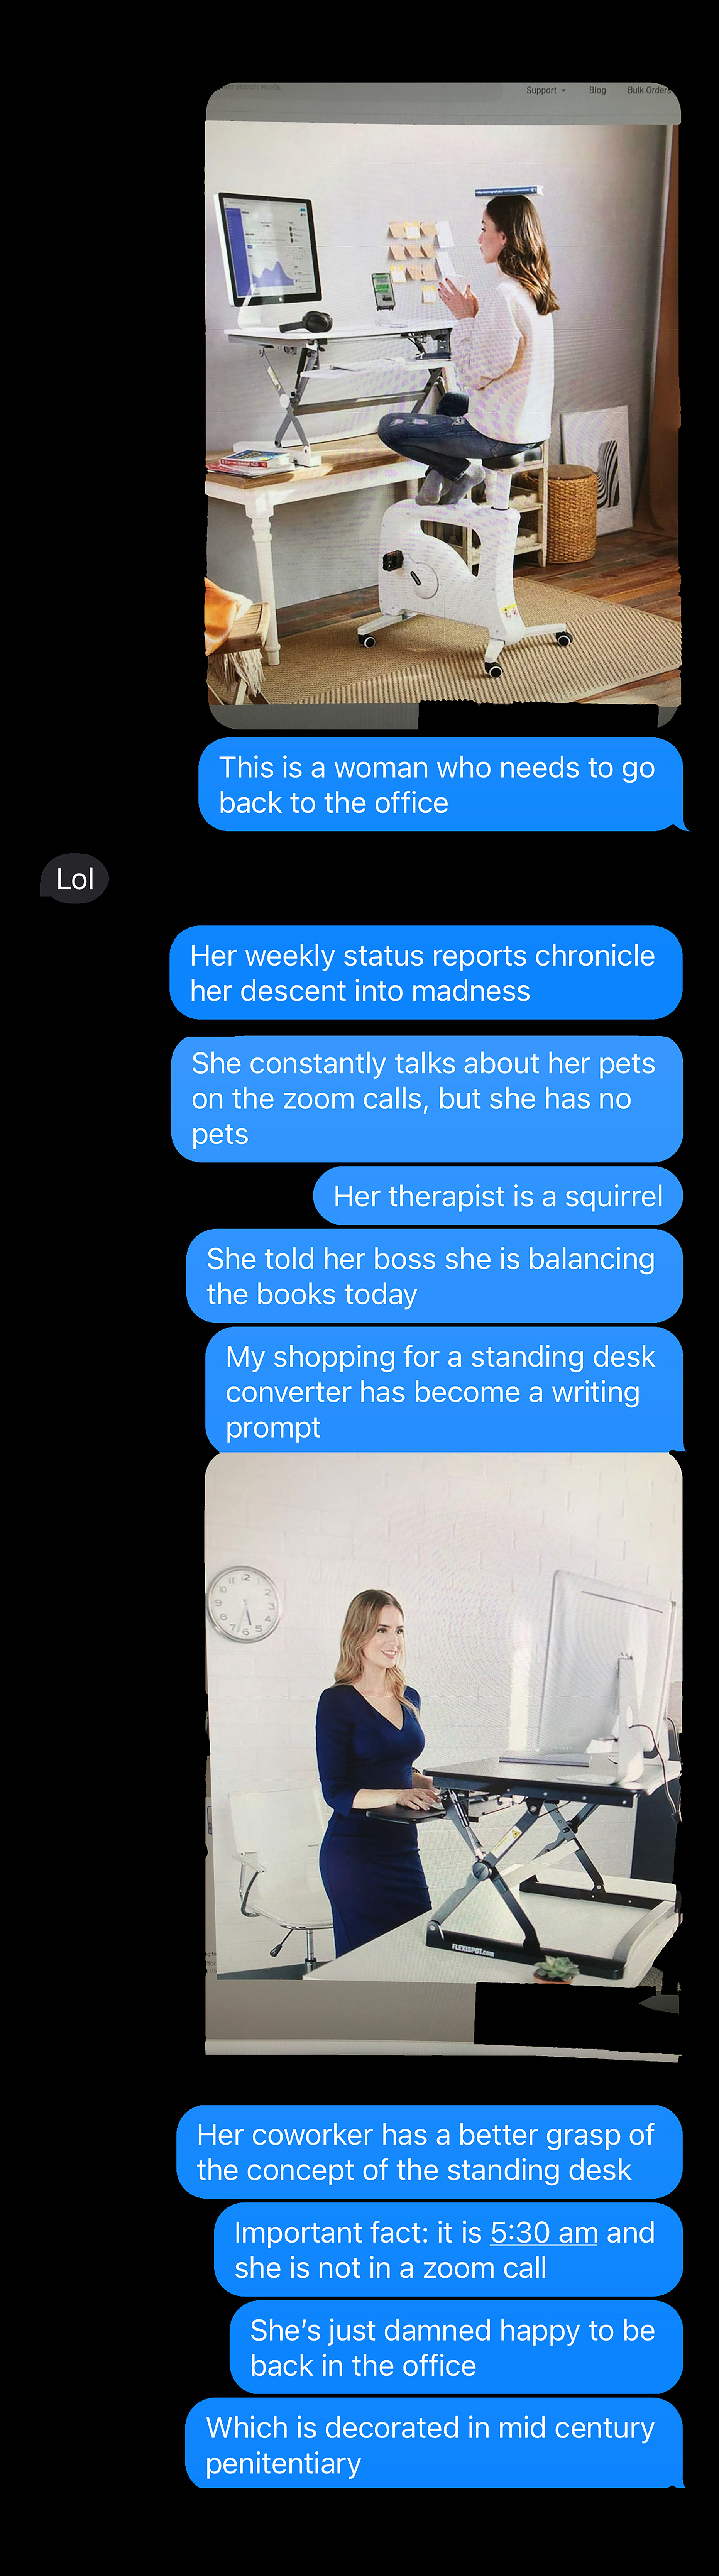 A text exchange about a woman's descent into madness working from home.